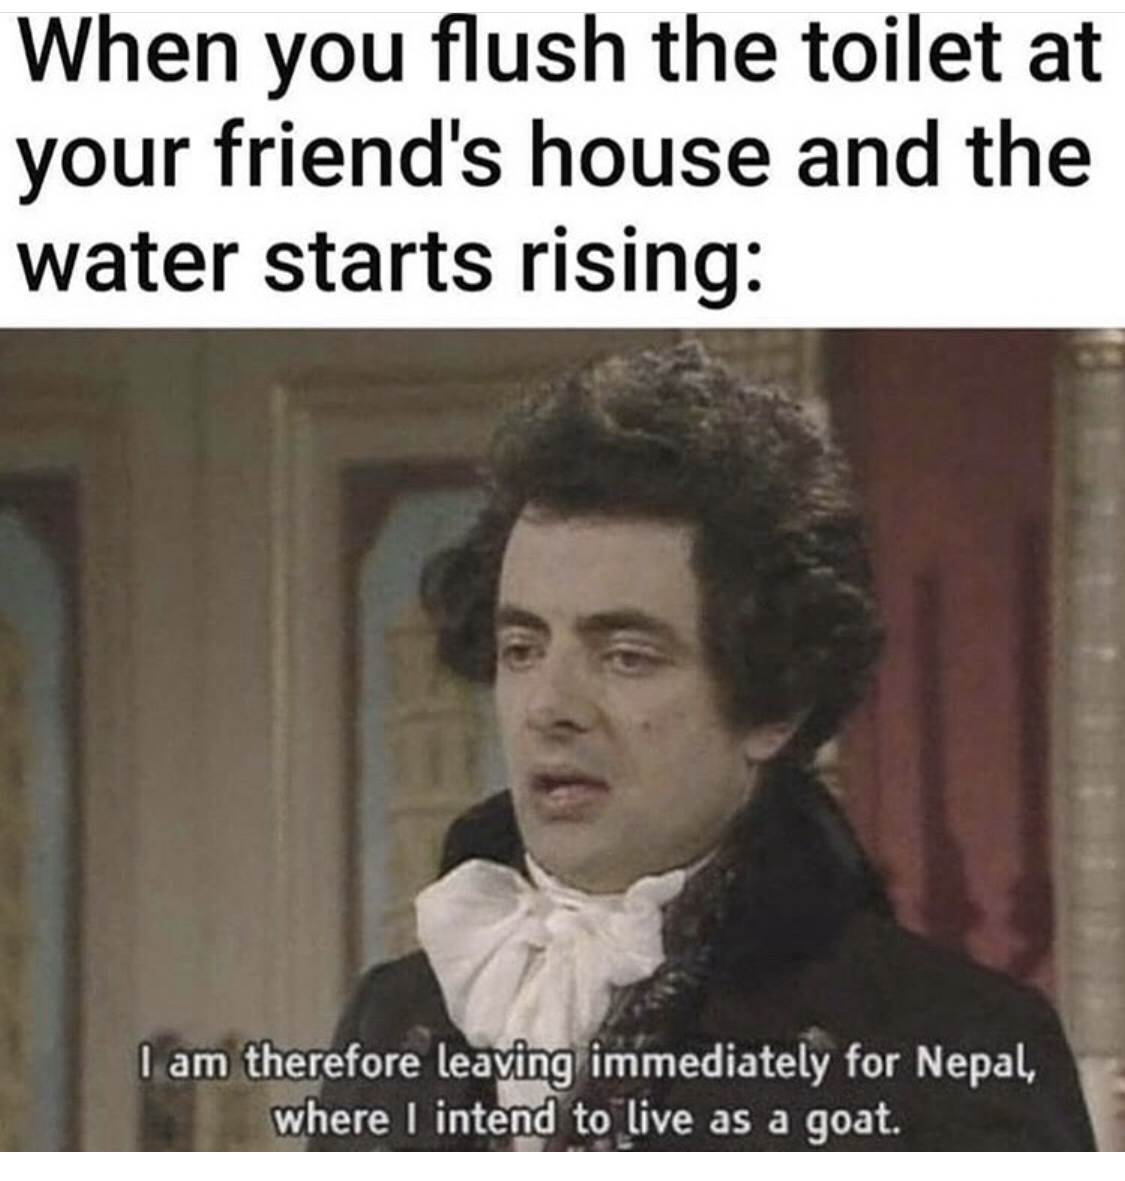 you flush the toilet and water starts rising meme - When you flush the toilet at your friend's house and the water starts rising I am therefore leaving immediately for Nepal, where I intend to live as a goat.